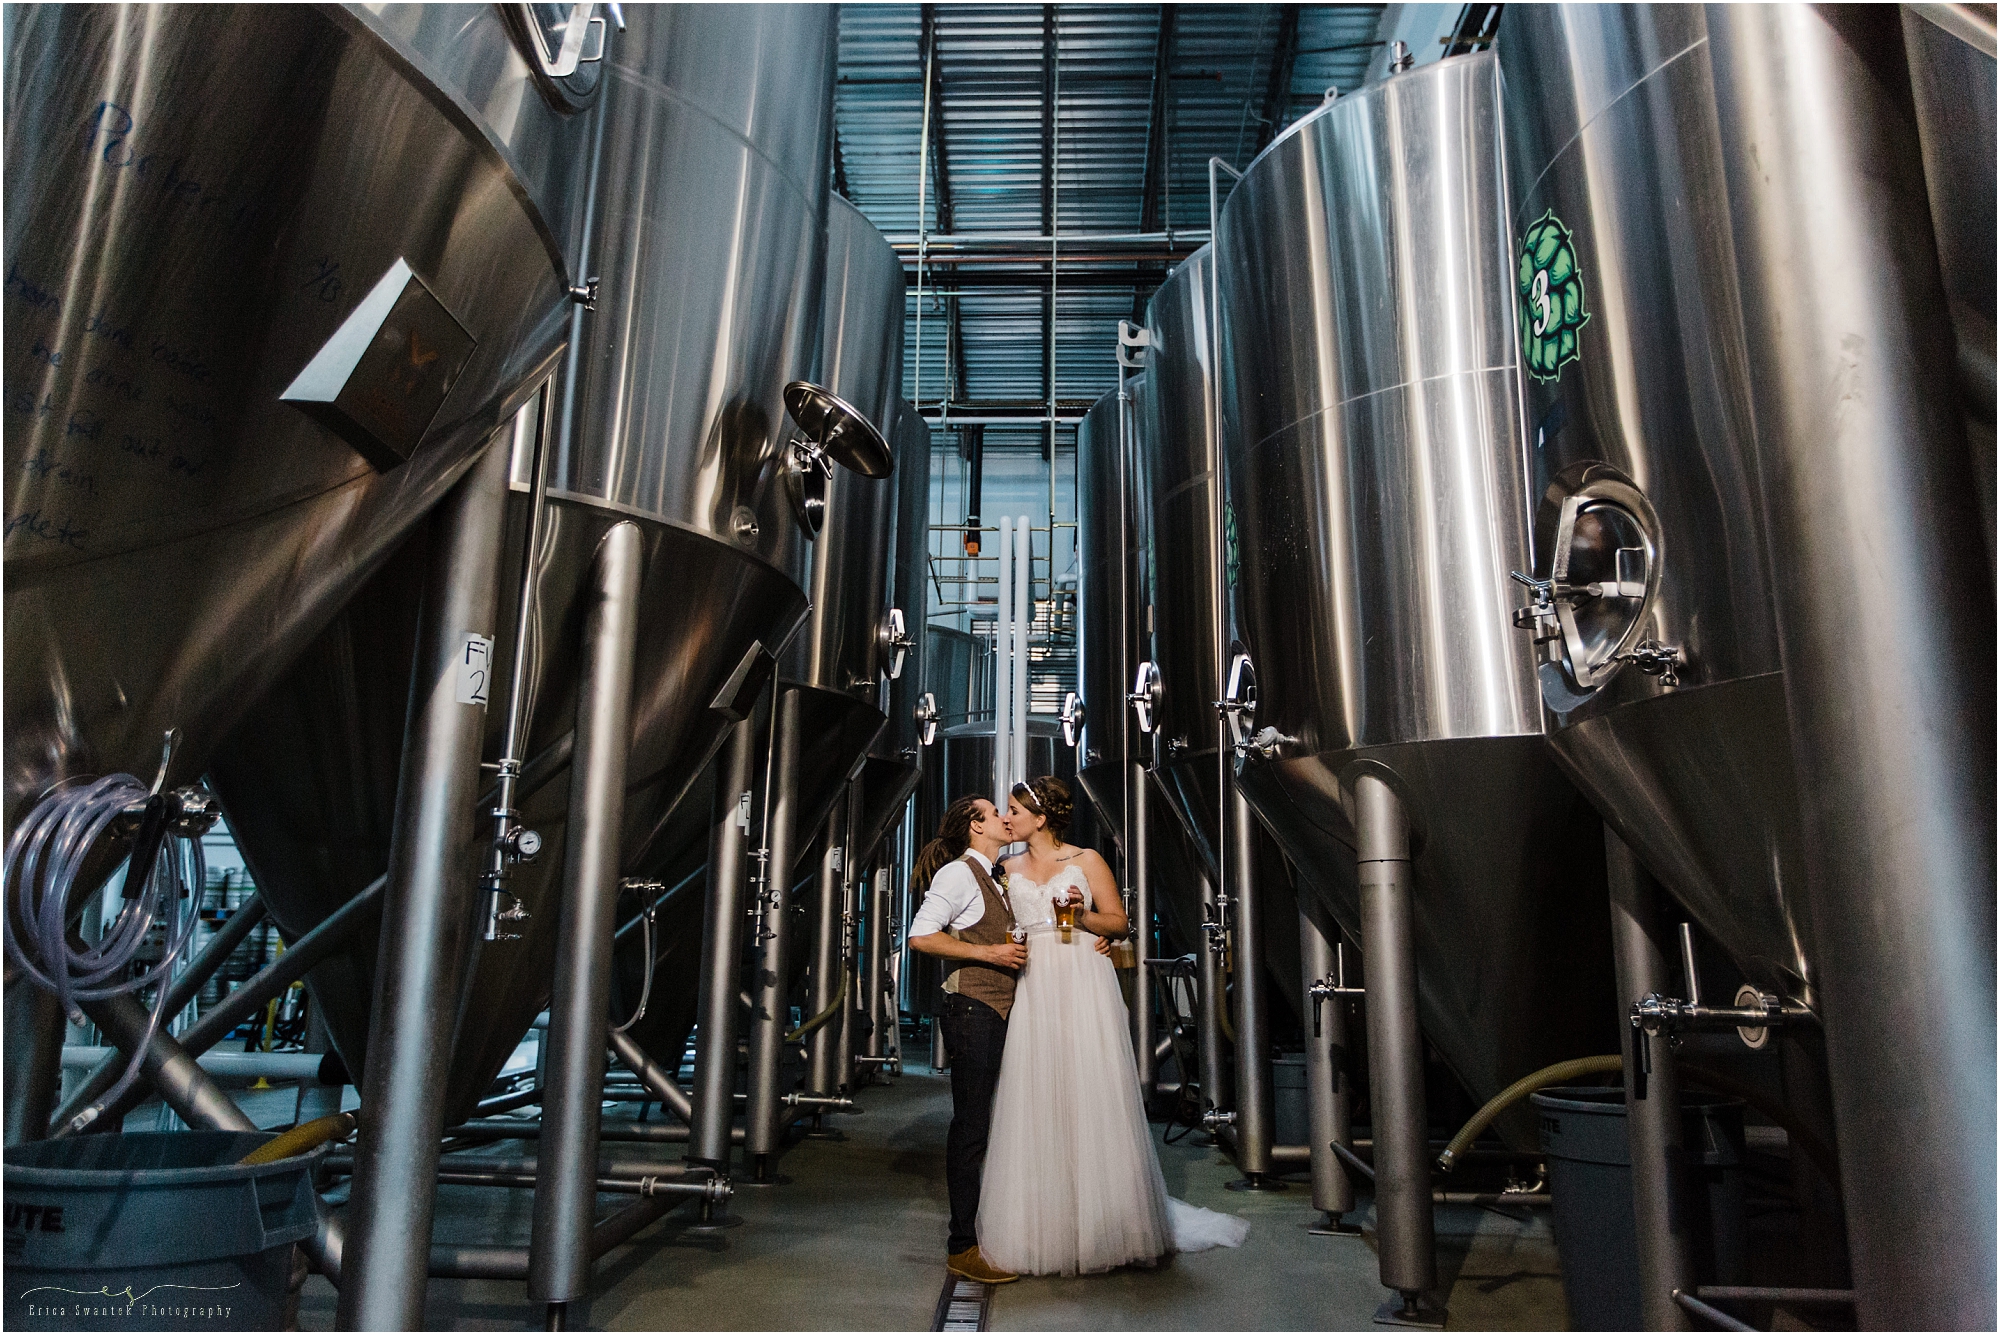 The stainless steel brewing fermenters create a cool portrait of the couple at their Worthy Brewing Wedding in Bend Oregon. | Erica Swantek